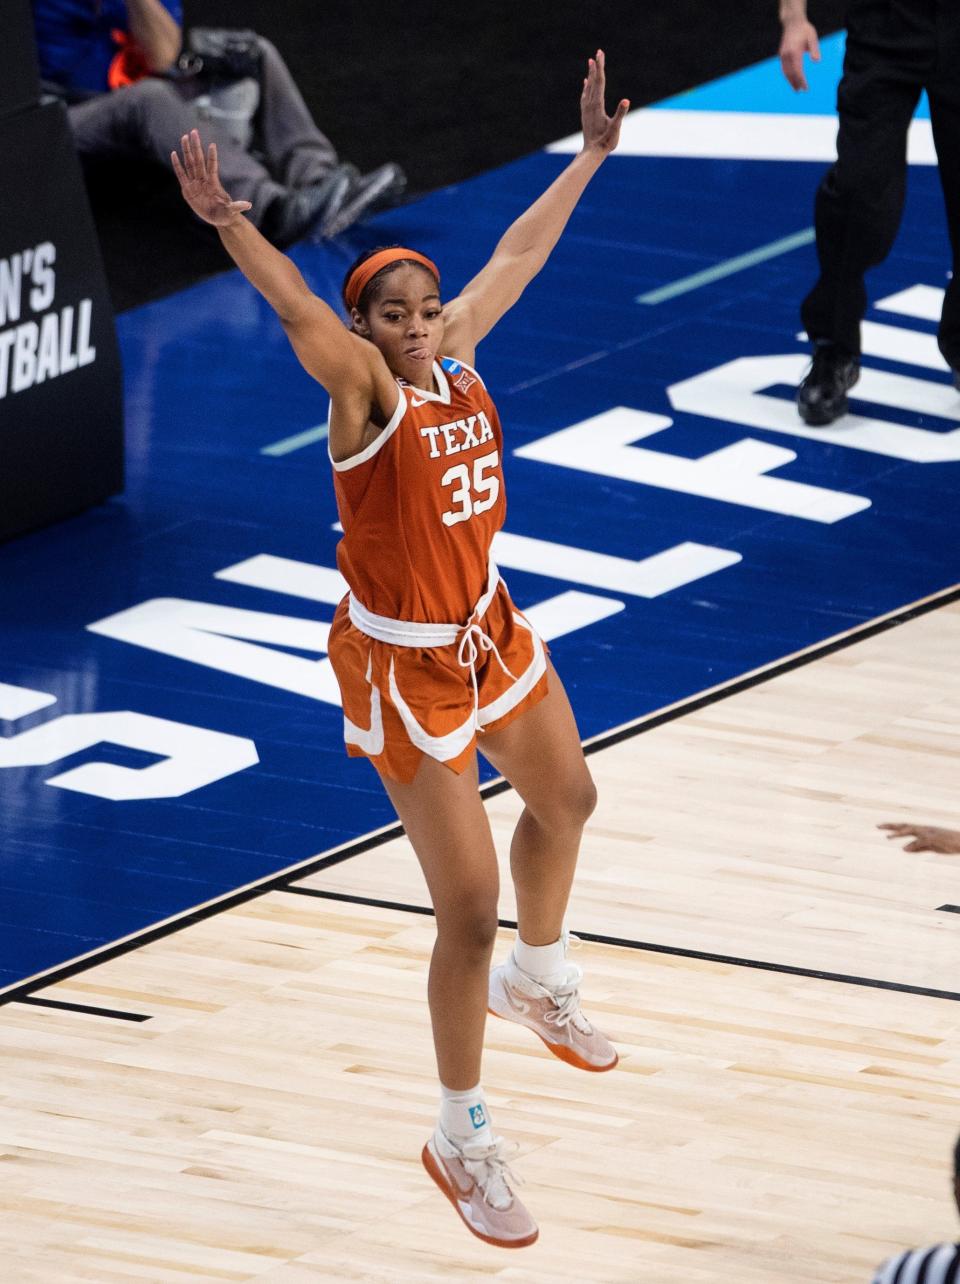 Texas forward Charli Collier helped lead the Longhorns to the Elite Eight of the NCAA women's basketball tournament following an upset of No. 2 seed Maryland in the Sweet 16.